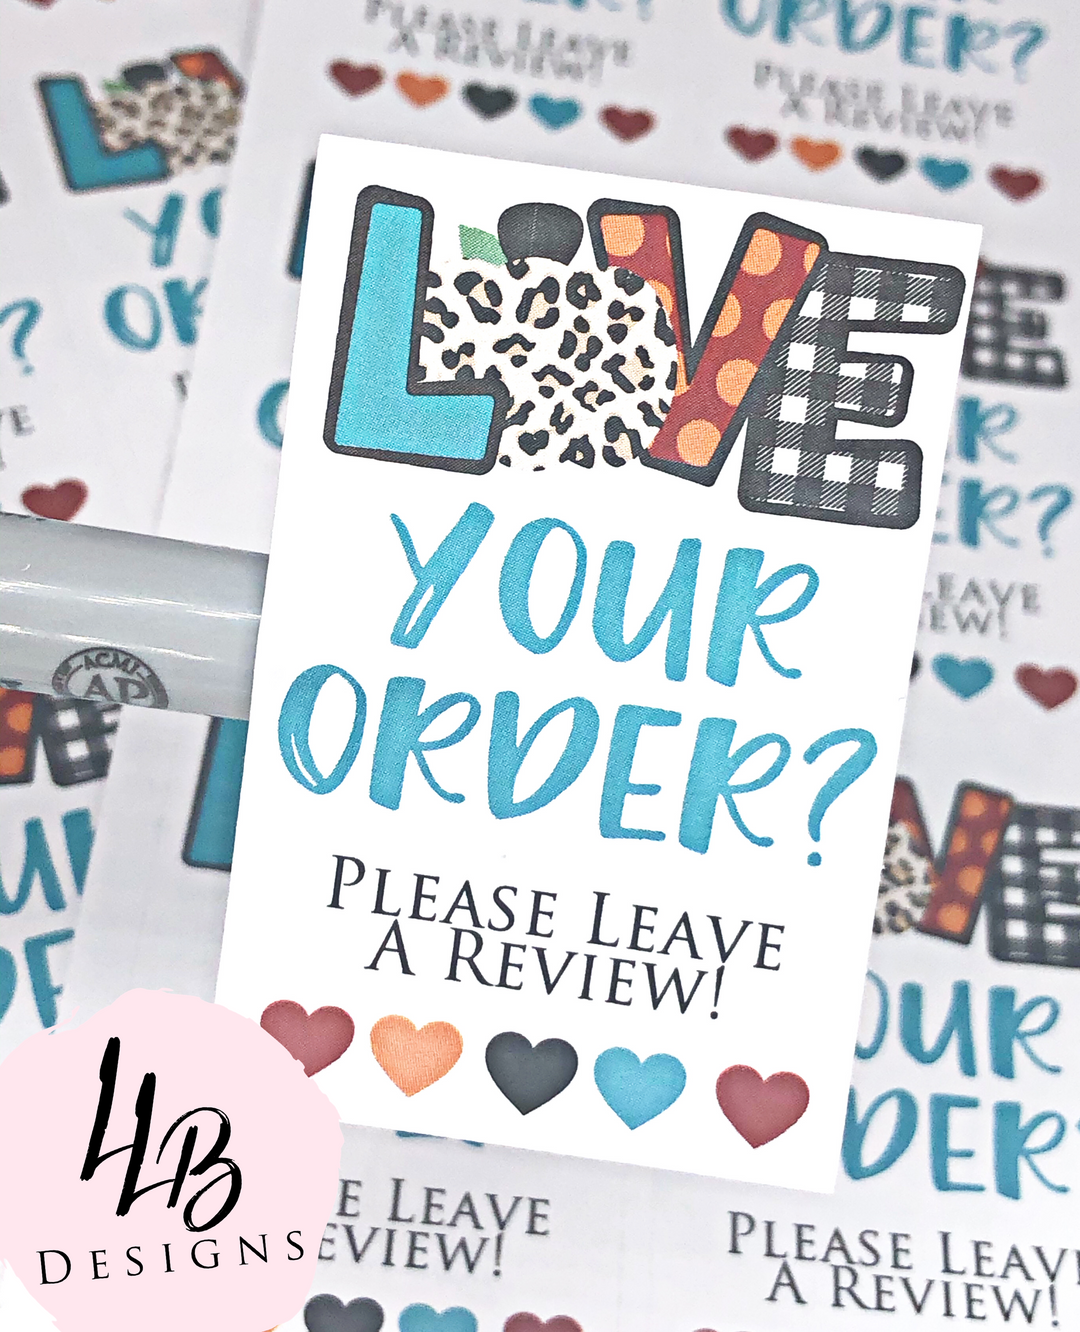 Fall Love Your Order? Leave Review  | Packaging Stickers | Business Branding | Small Shop Stickers | Sticker #: S0069 | Ready To Ship